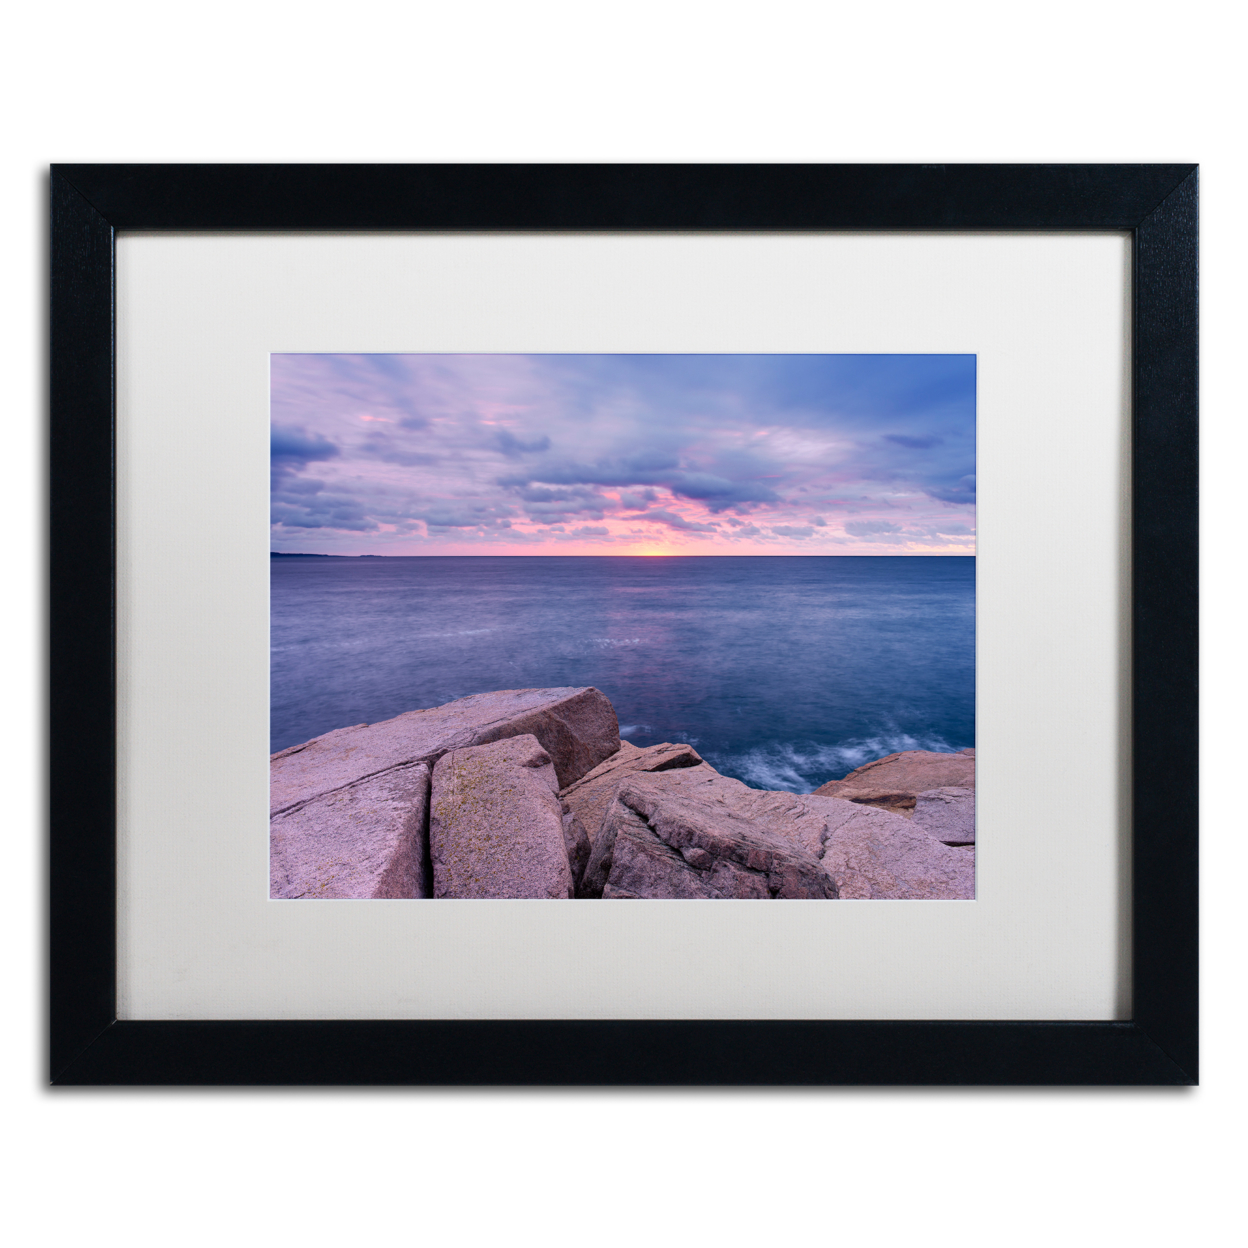 Michael Blanchette Photography 'Earth Water Sky' Black Wooden Framed Art 18 X 22 Inches